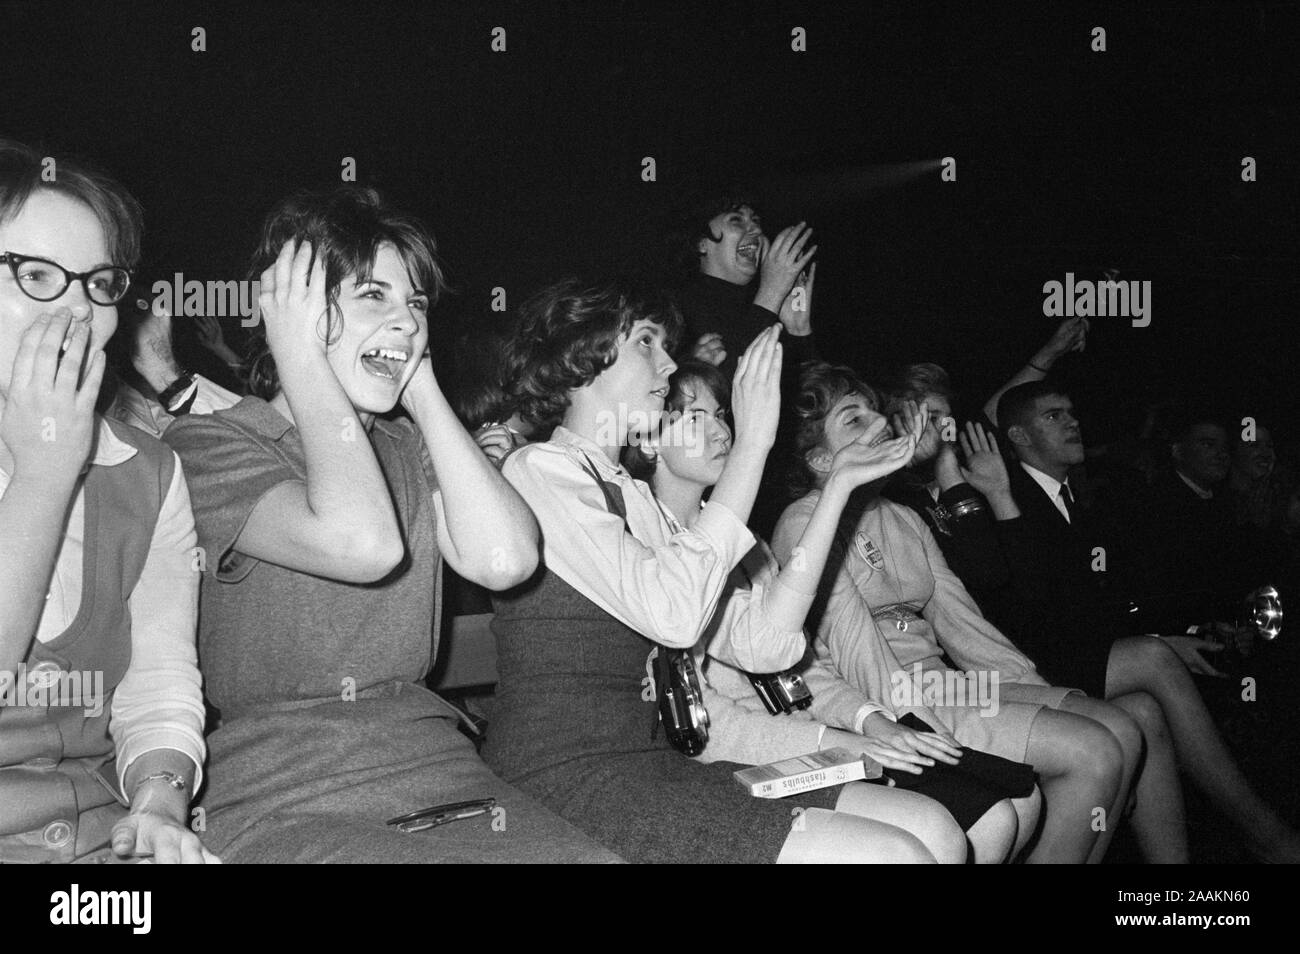 Excited Fans Reacting to The Beatles British Rock and Roll Performing,  Washington Coliseum, Washington, D.C., USA, photograph by Marion S.  Trikosko, February 11, 1964 Stock Photo - Alamy